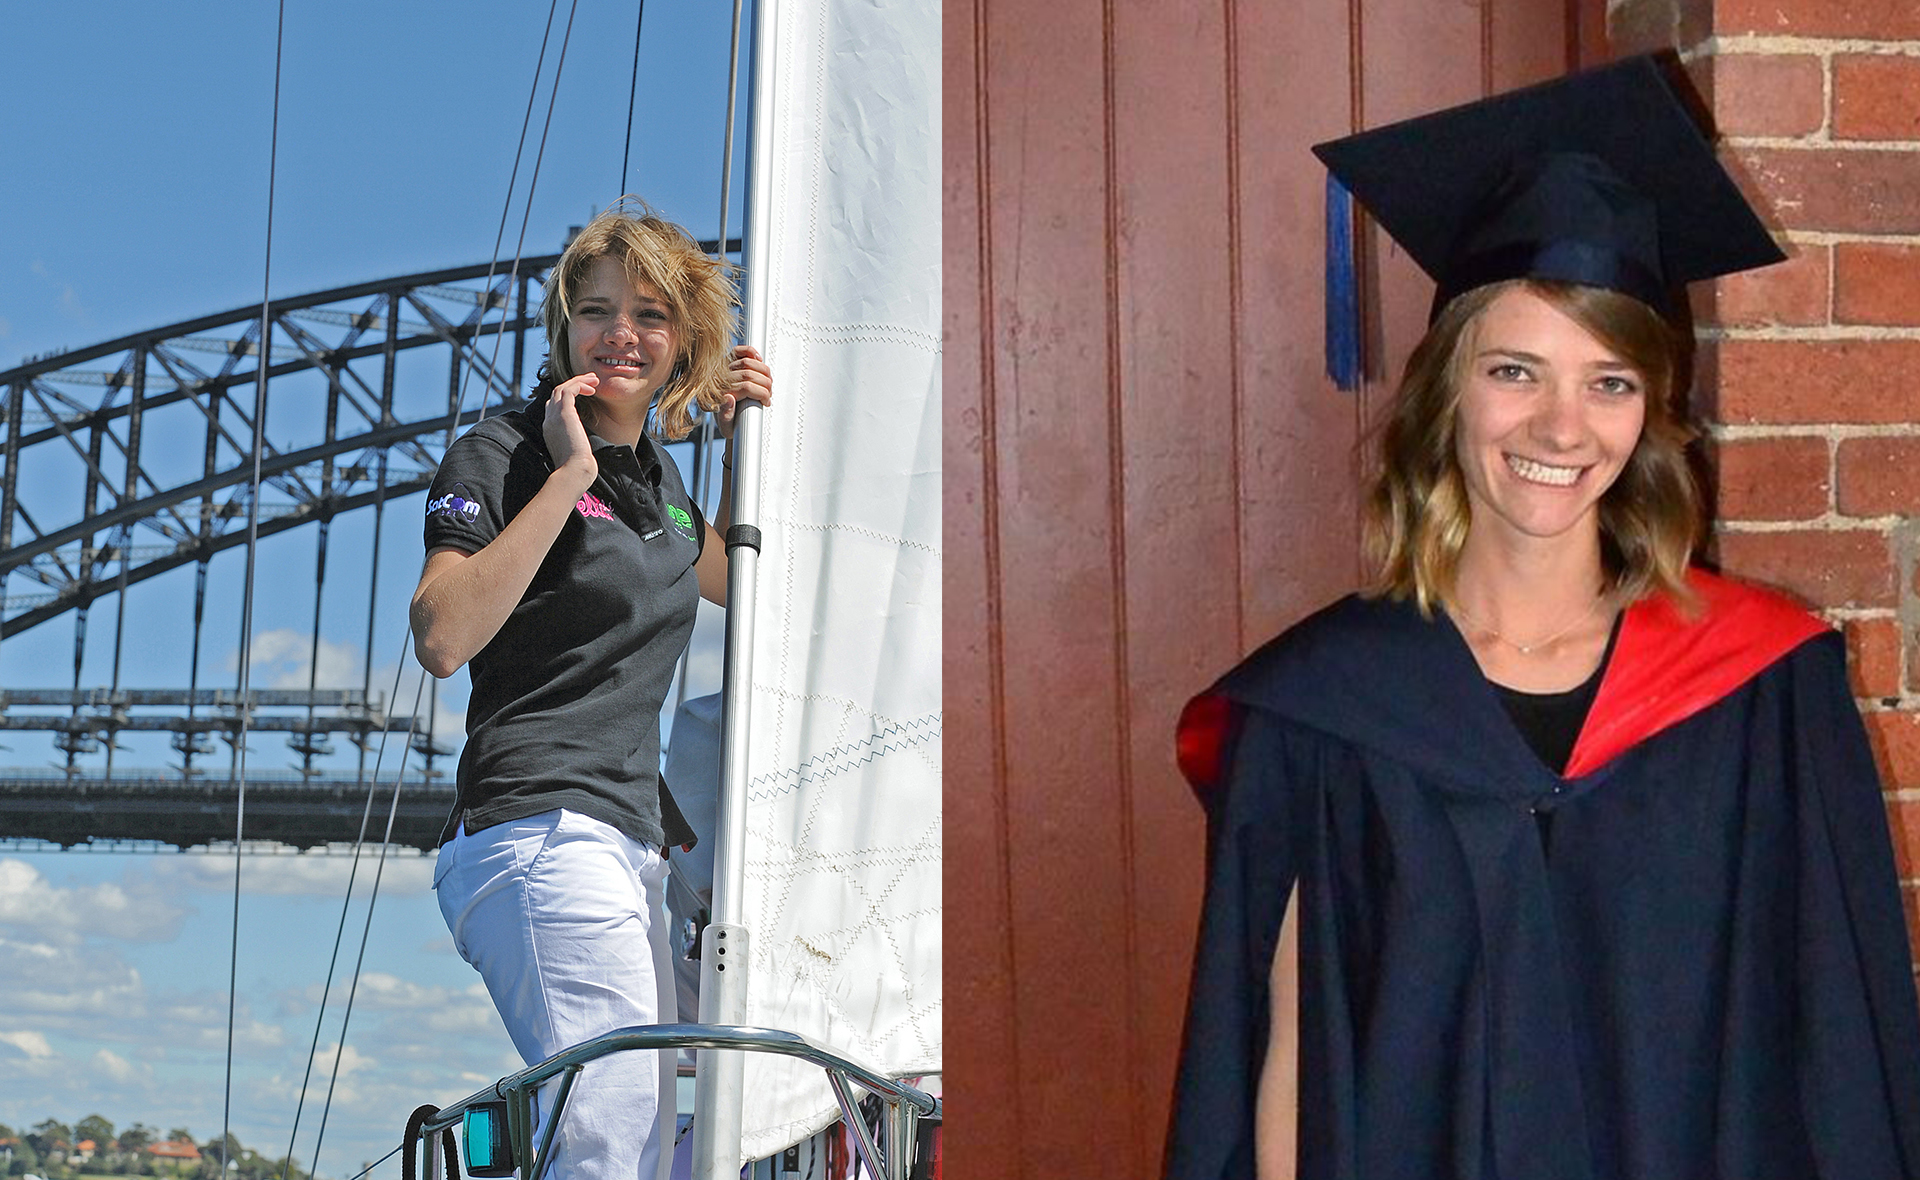 Jessica Watson’s solo sail journey around the world is getting the Netflix treatment, so we decided to uncover what her life is like today